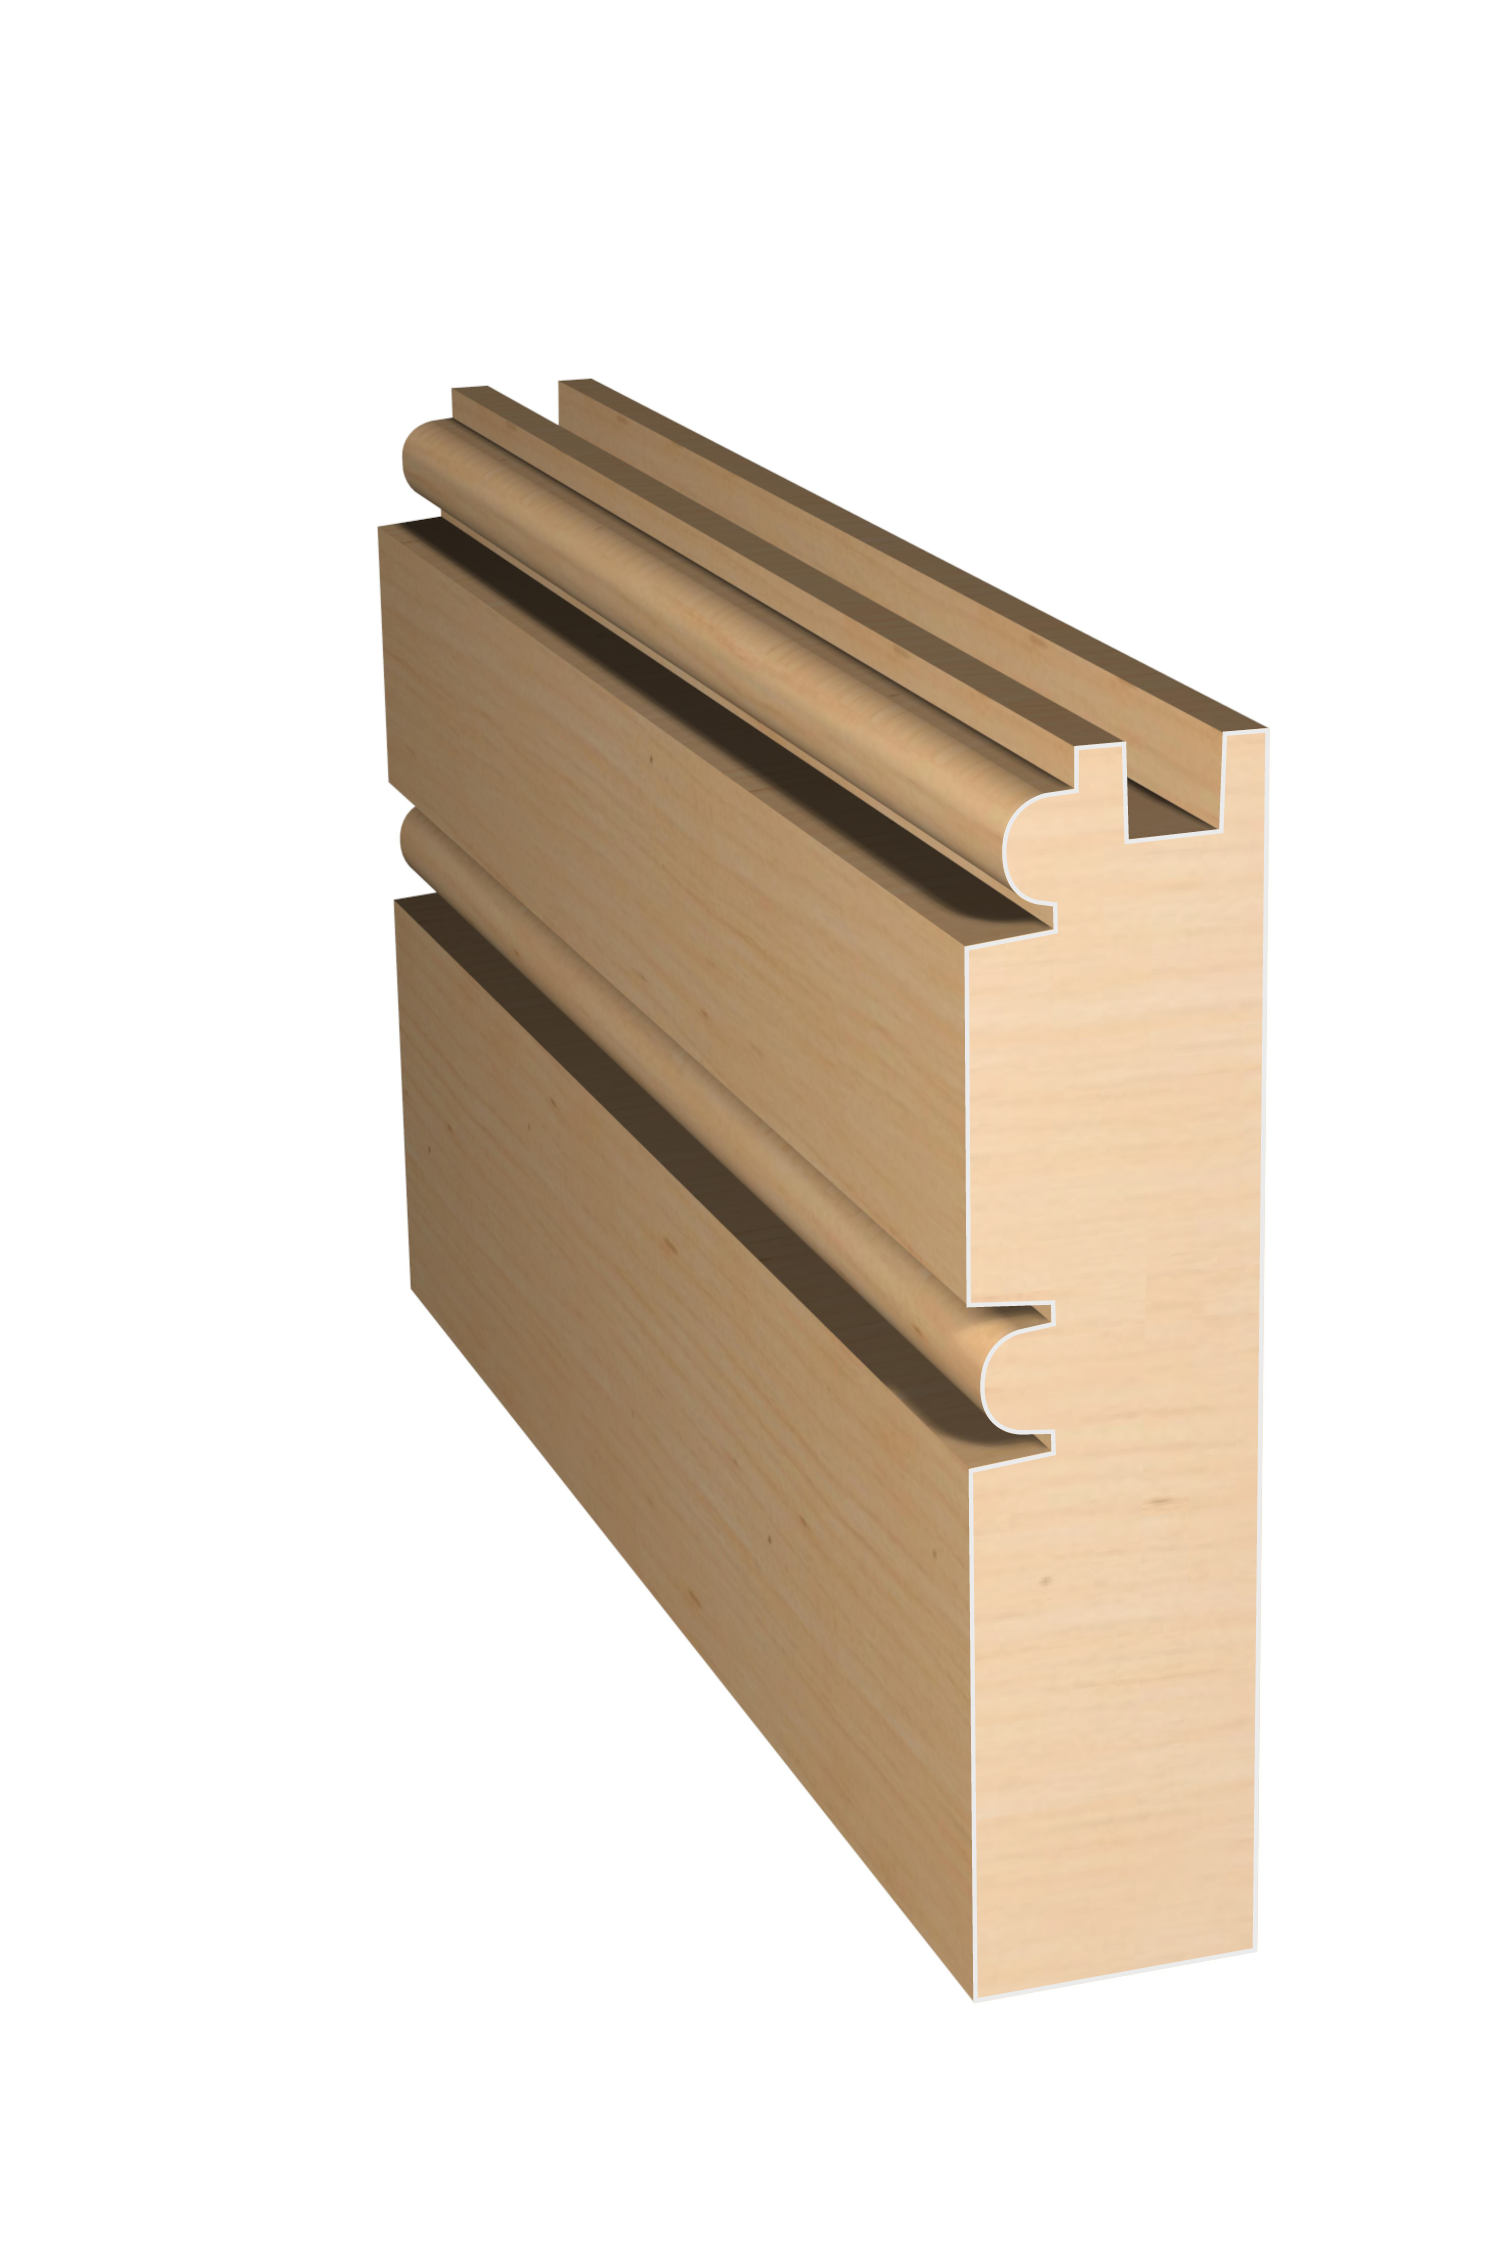 Three dimensional rendering of custom cabinet rail wood molding CABPL3381 made by Public Lumber Company in Detroit.